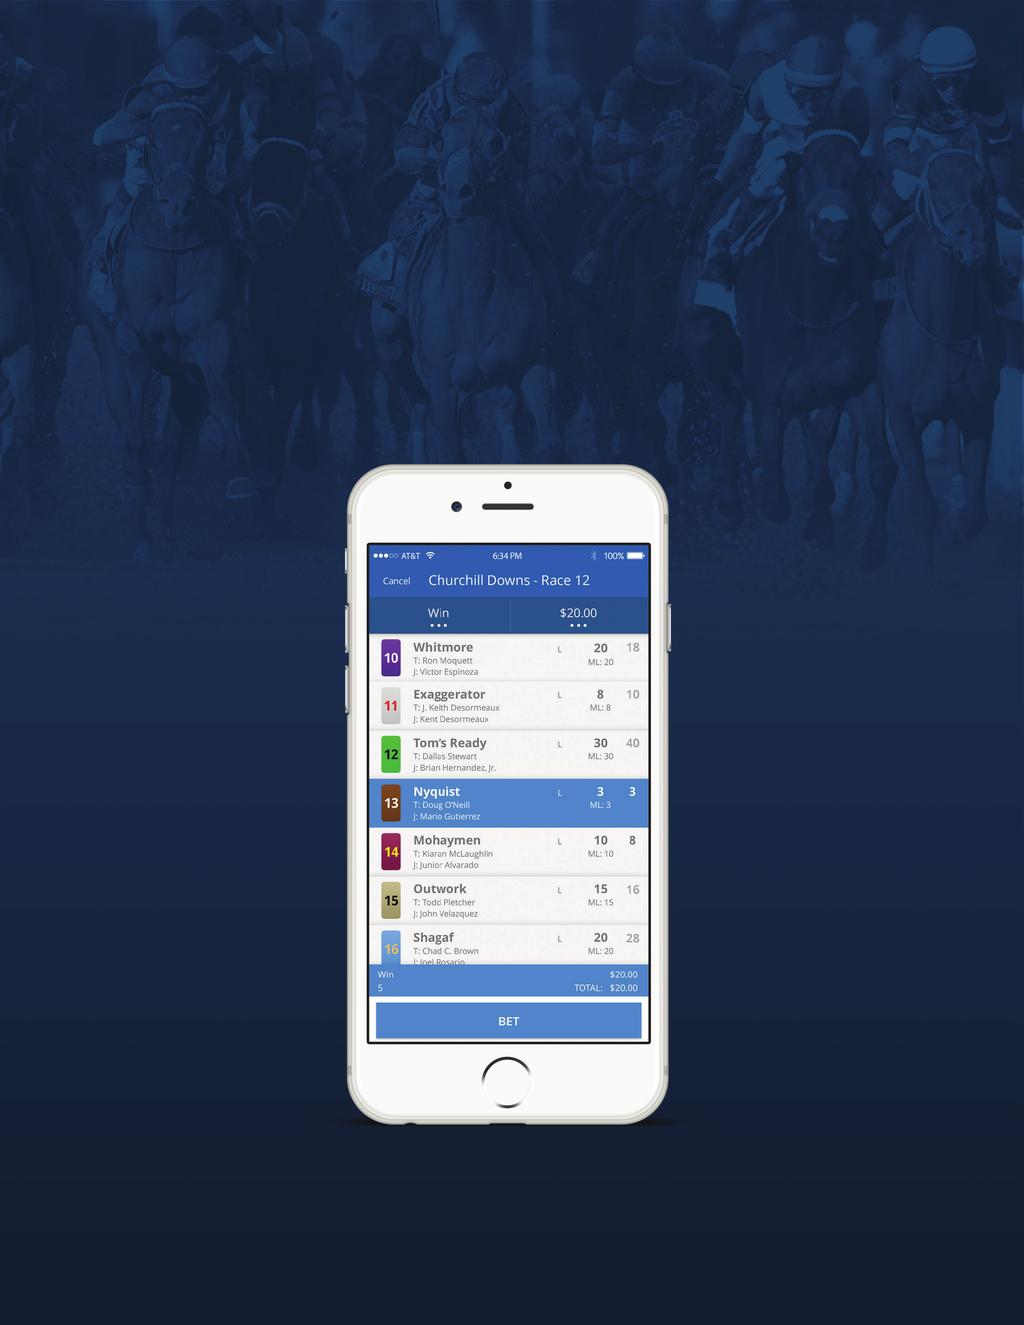 BET ANYWHERE! DOWNLOAD THE TWINSPIRES APP SIGN UP FOR A $00 BONUS!